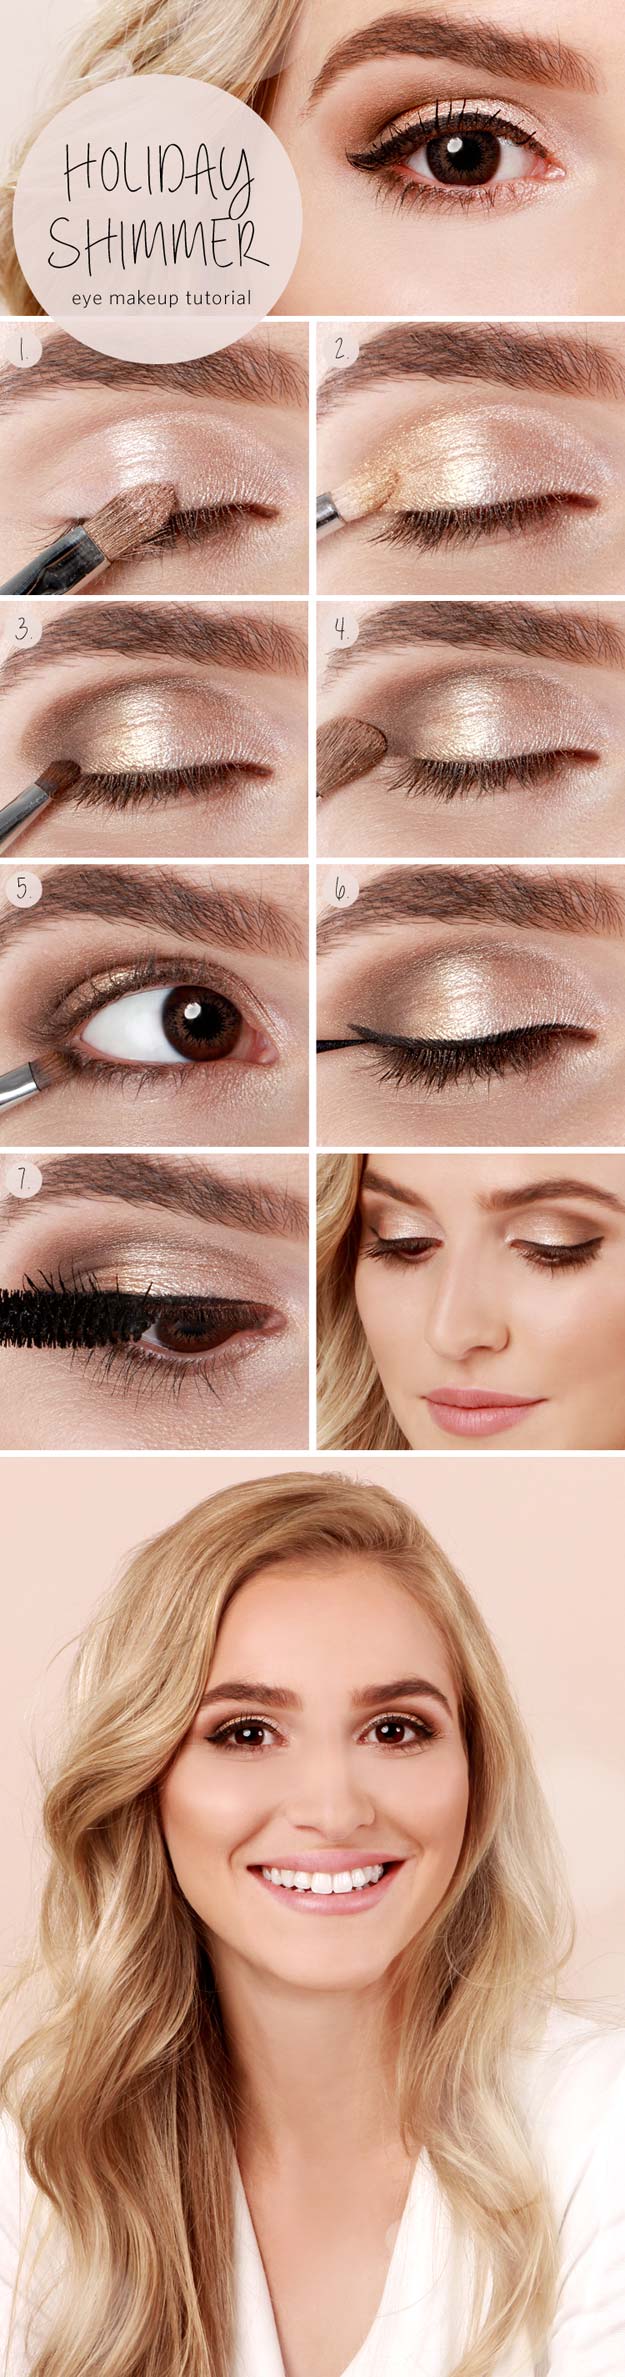 Best Makeup Tutorials for Teens -Holiday Shimmer Eye Tutorial - Easy Makeup Ideas for Beginners - Step by Step Tutorials for Foundation, Eye Shadow, Lipstick, Cheeks, Contour, Eyebrows and Eyes - Awesome Makeup Hacks and Tips for Simple DIY Beauty - Day and Evening Looks 